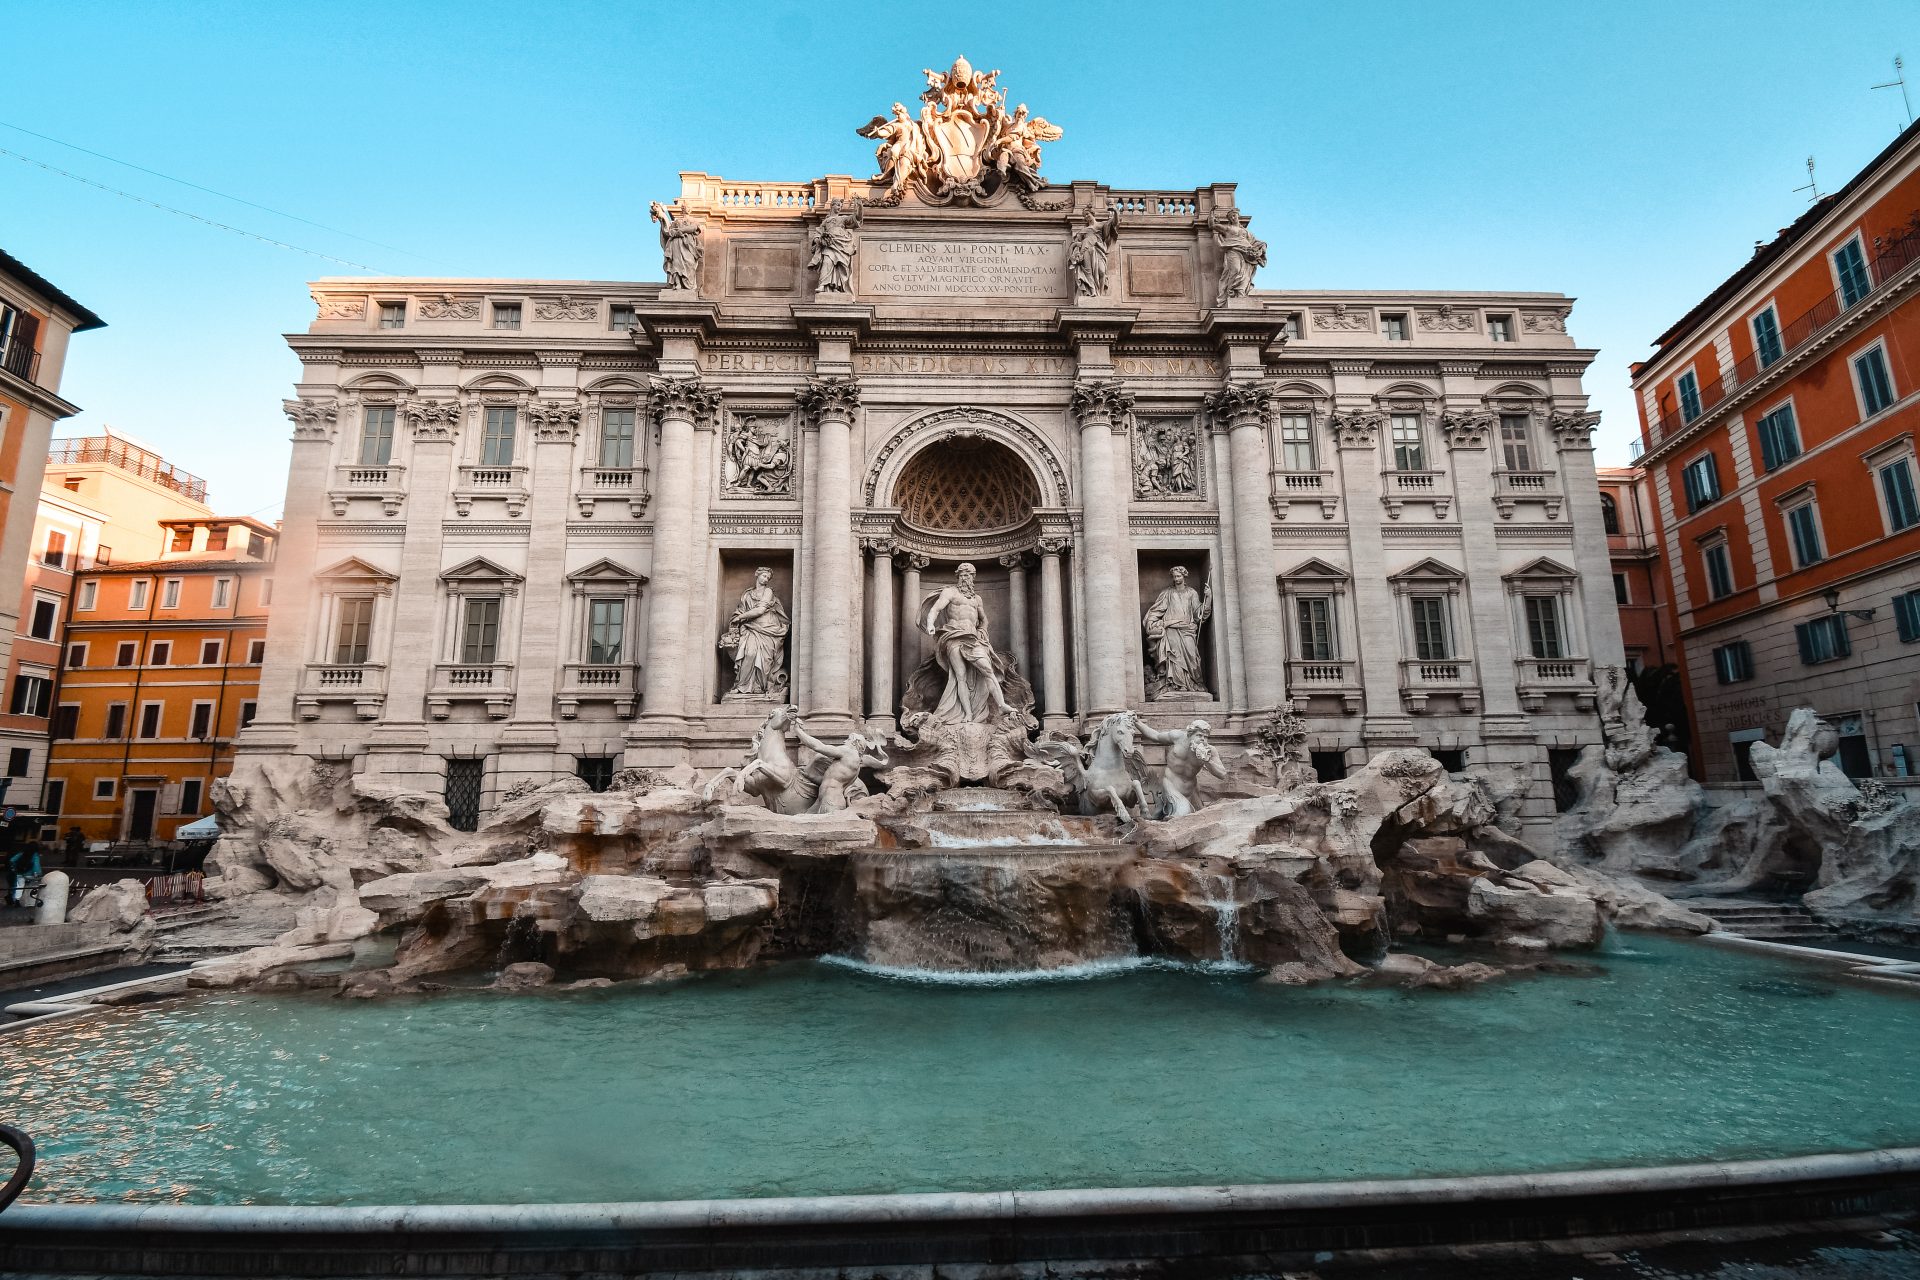 The beautiful icon of Rome: the Trevi Fountain.